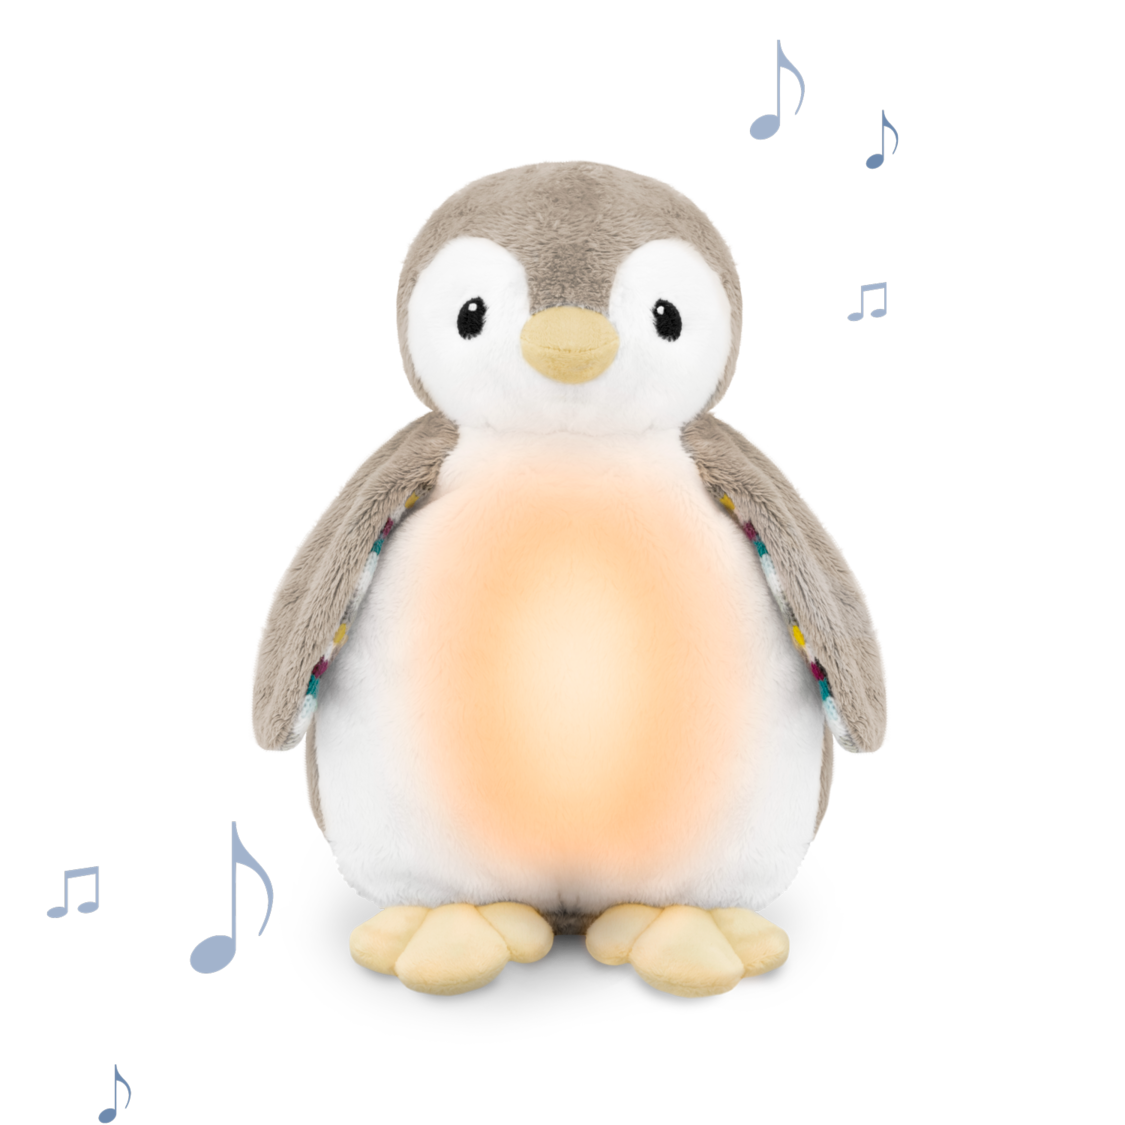 Zazu Sound Soother Soft Toy with Nightlight, 6 Melodies, Voice Recording and Cry Sensor - Phoebe the penguin